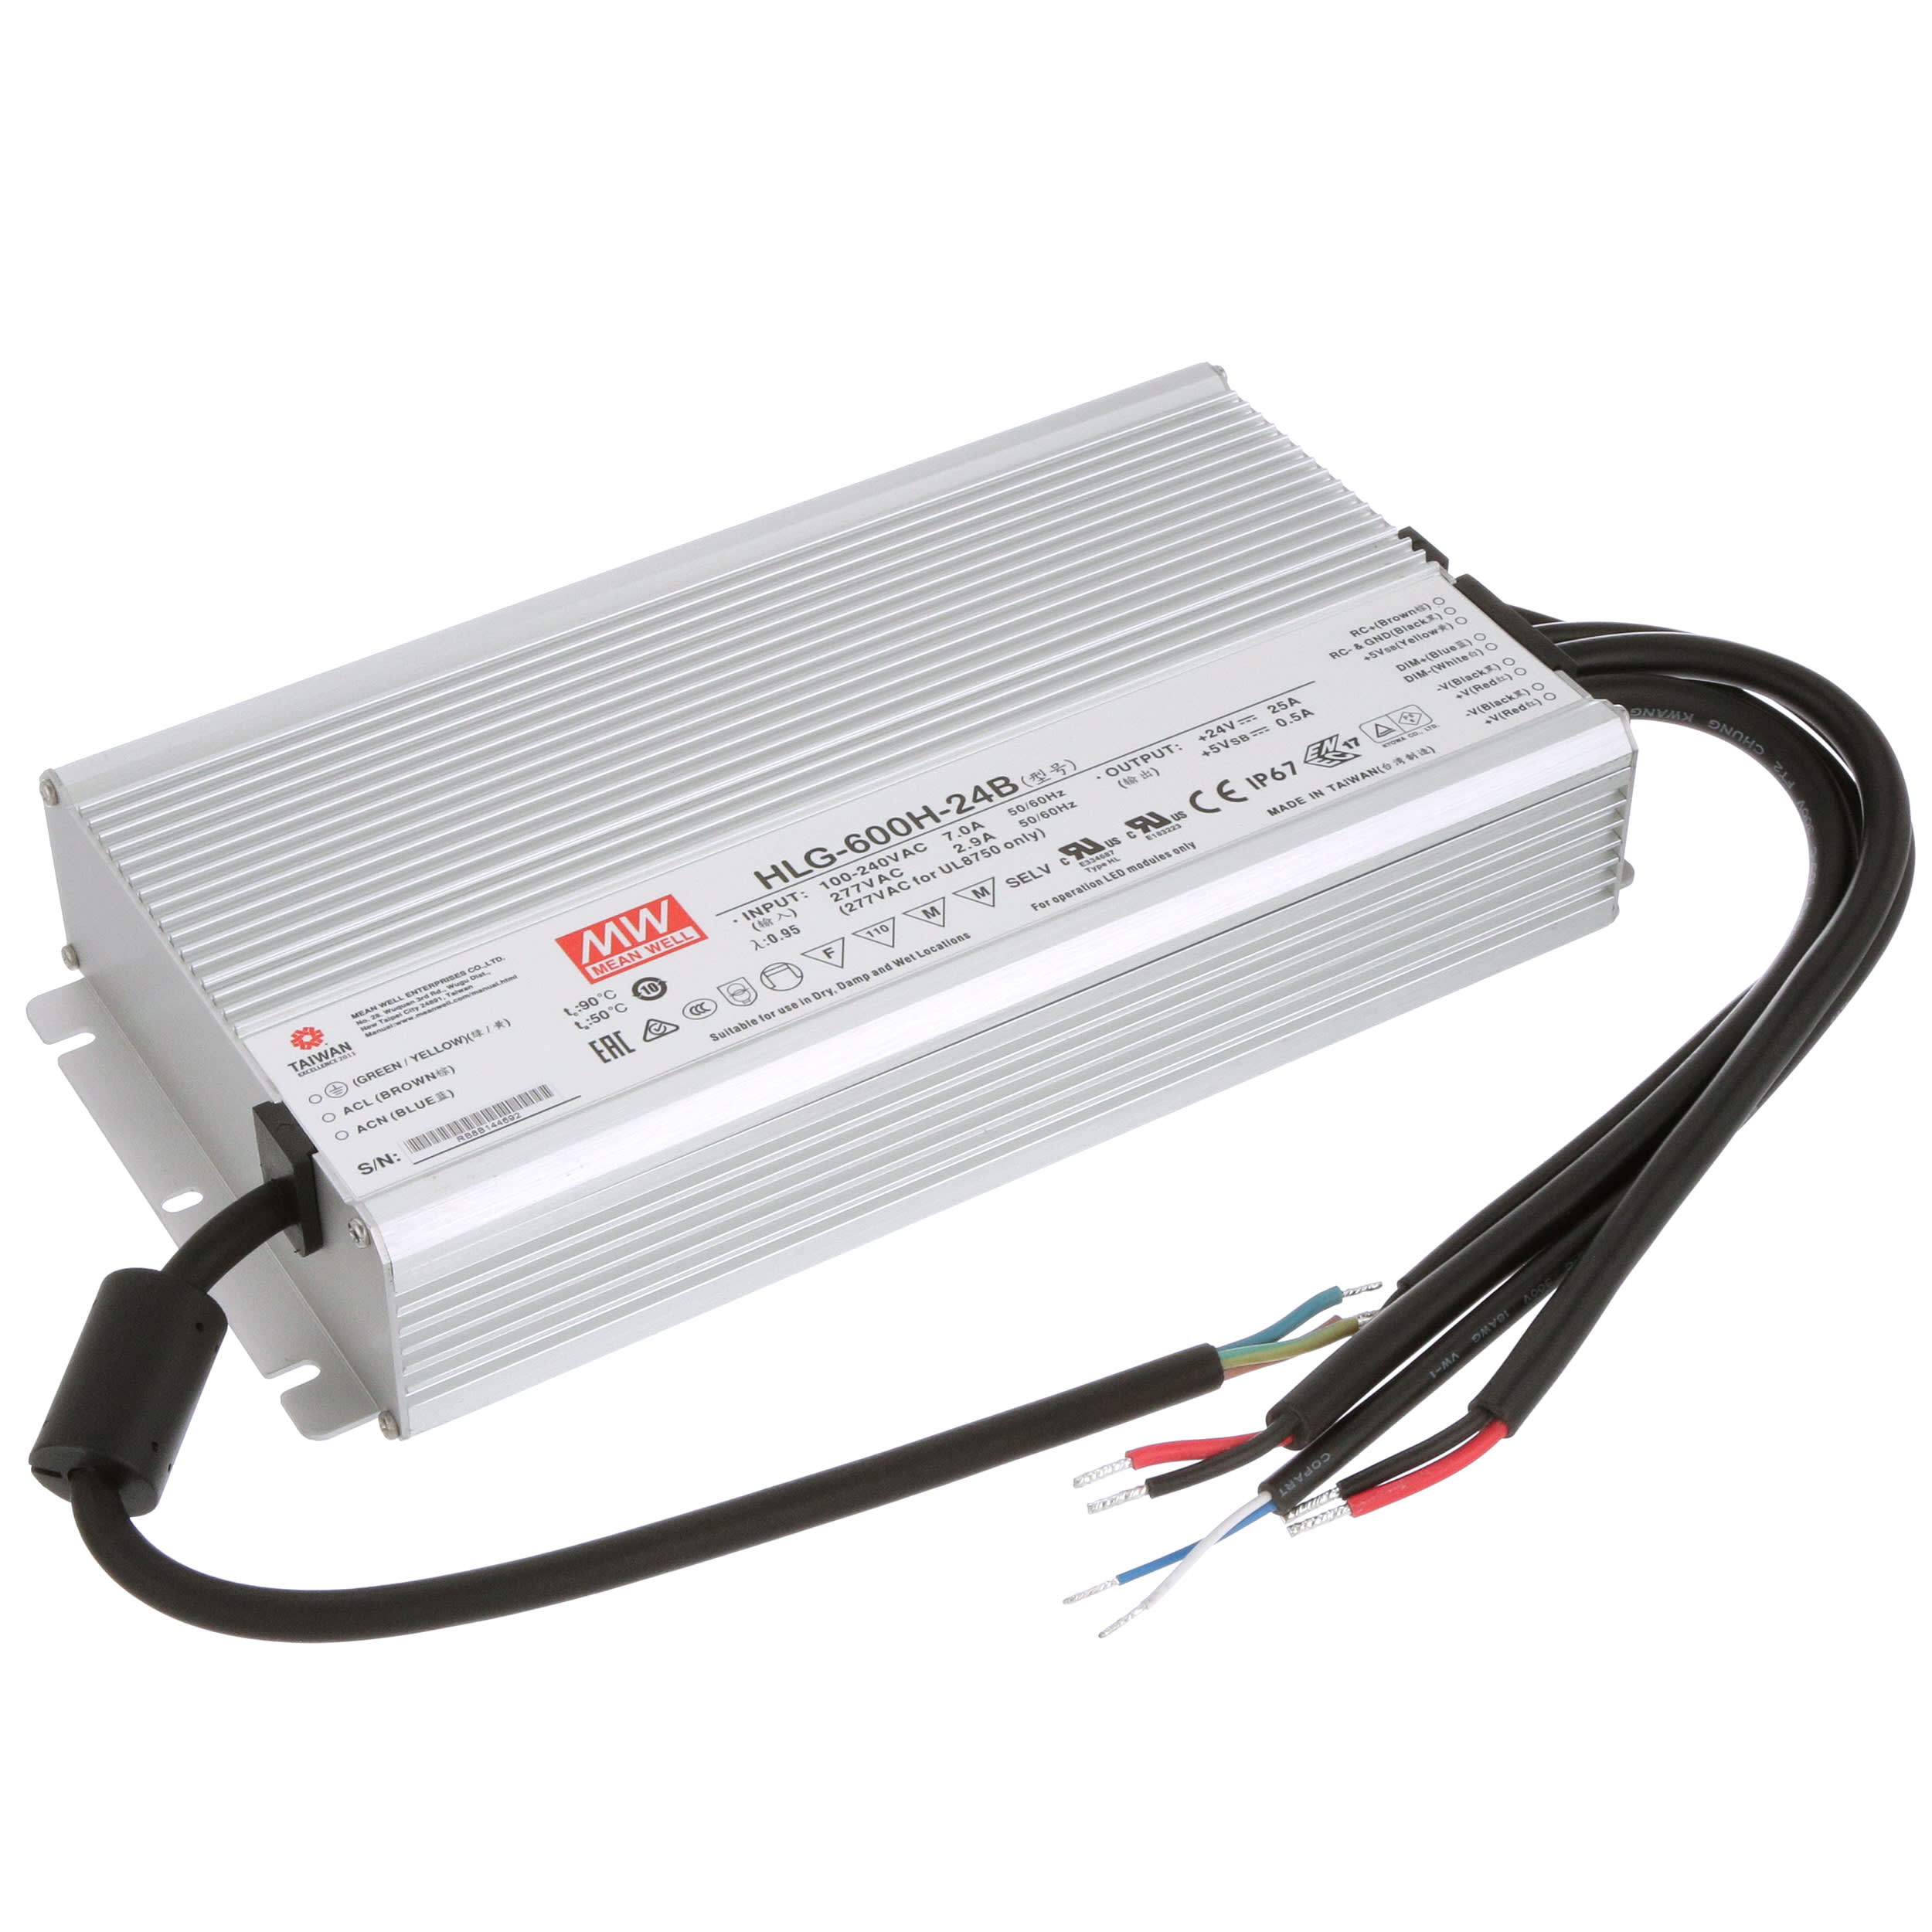 MEAN WELL NEW HLG-600H-12A 12V 40A LED Driver Power Supply 480W POWERNEX 